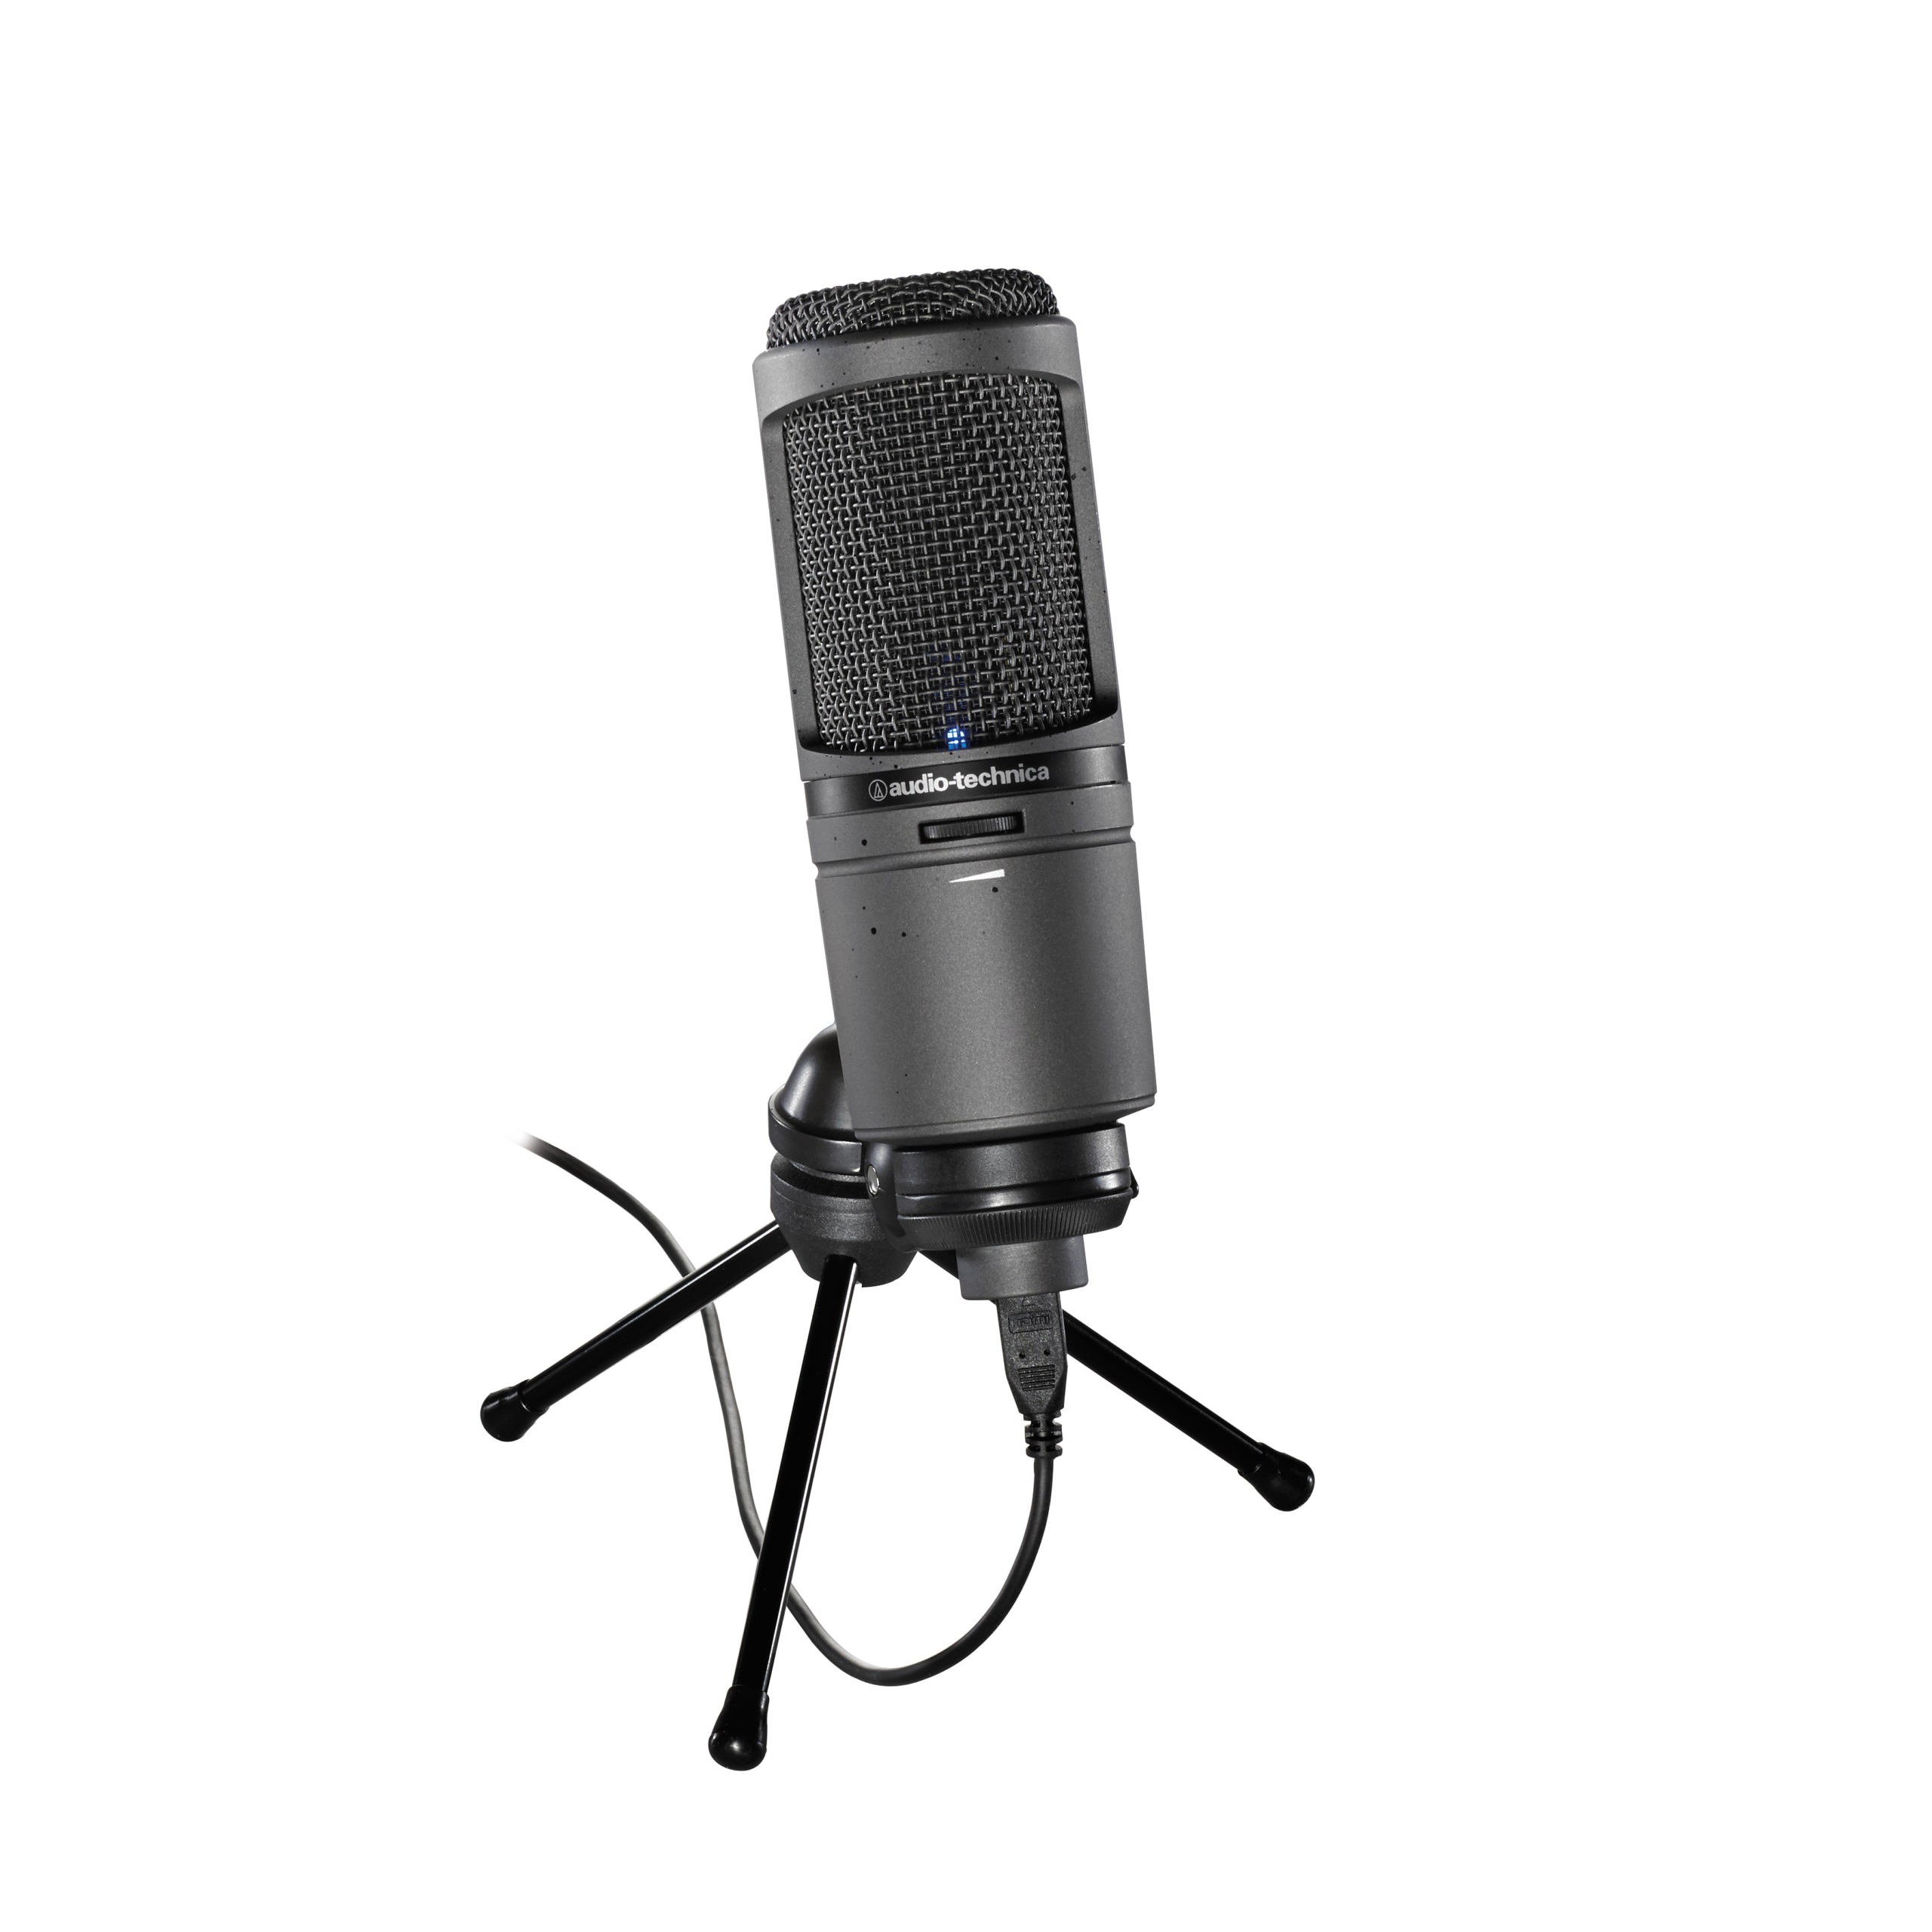 The Best USB Microphone On A Budget